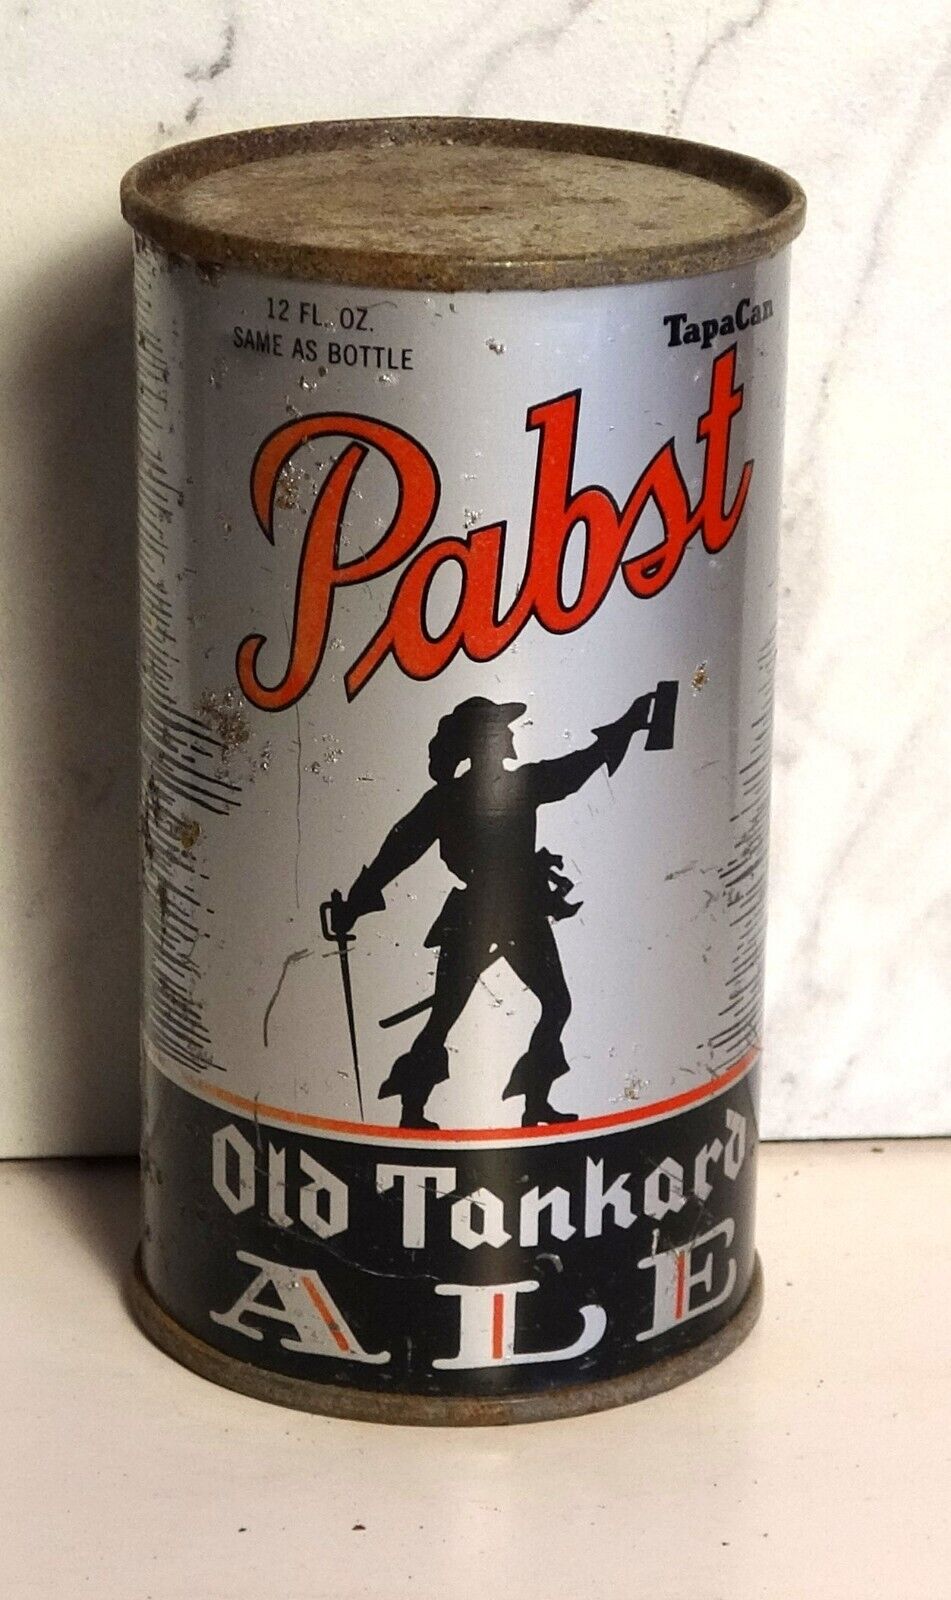 PABST OLD TANKARD ALE - FLAT TOP - OI - IRTP - MILWAUKEE, WISC